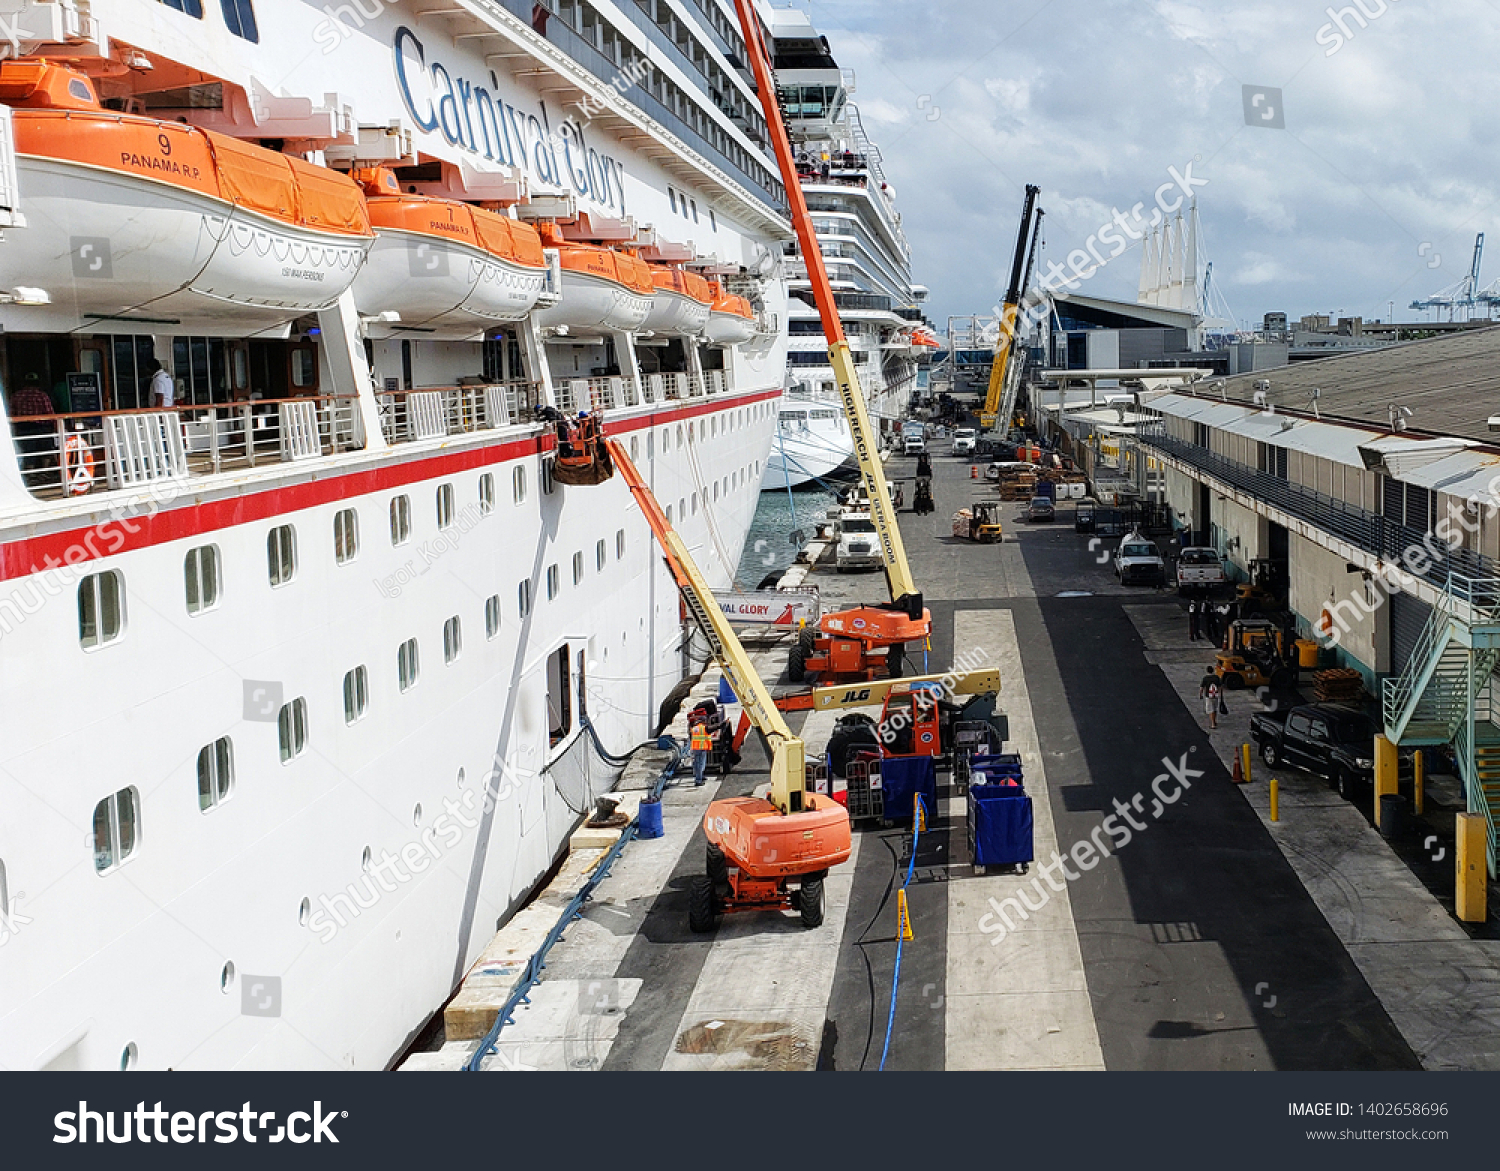 Carnival Cruise Line Small Tonnage Ship Stock Photo Edit